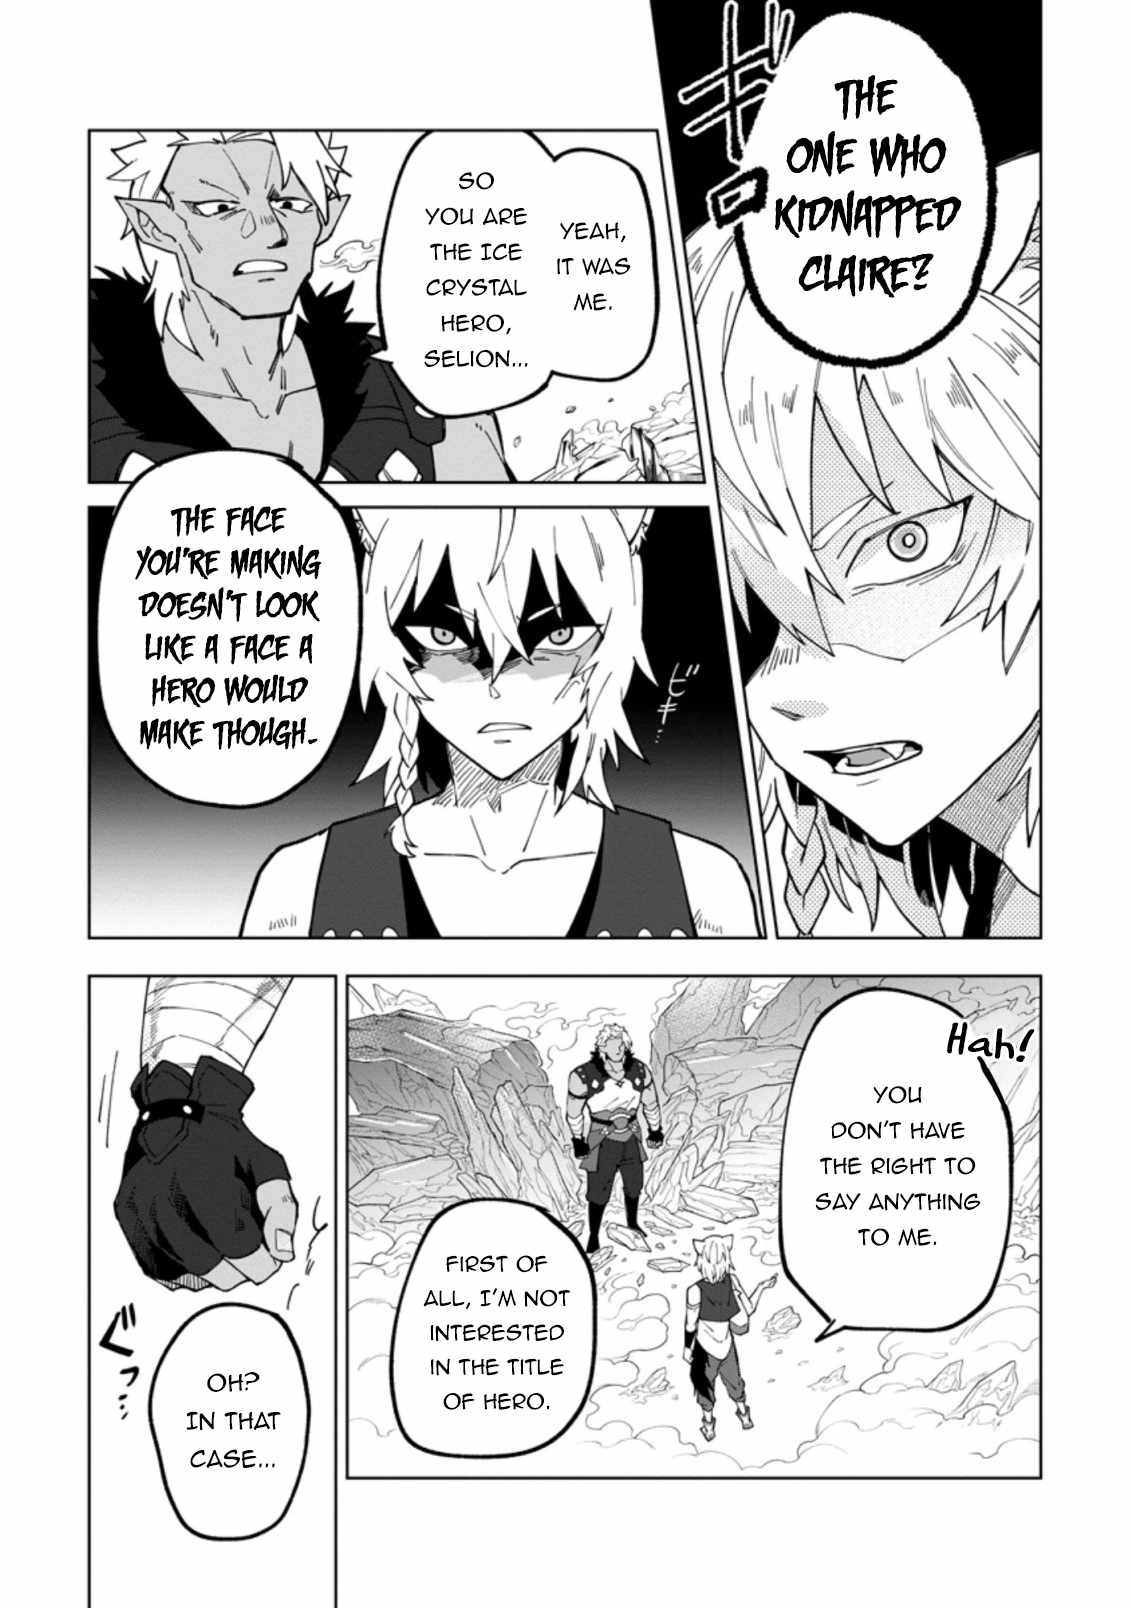 The White Mage Who Was Banished From the Hero's Party Is Picked up by an S Rank Adventurer ~ This White Mage Is Too Out of the Ordinary! Chapter 17.1